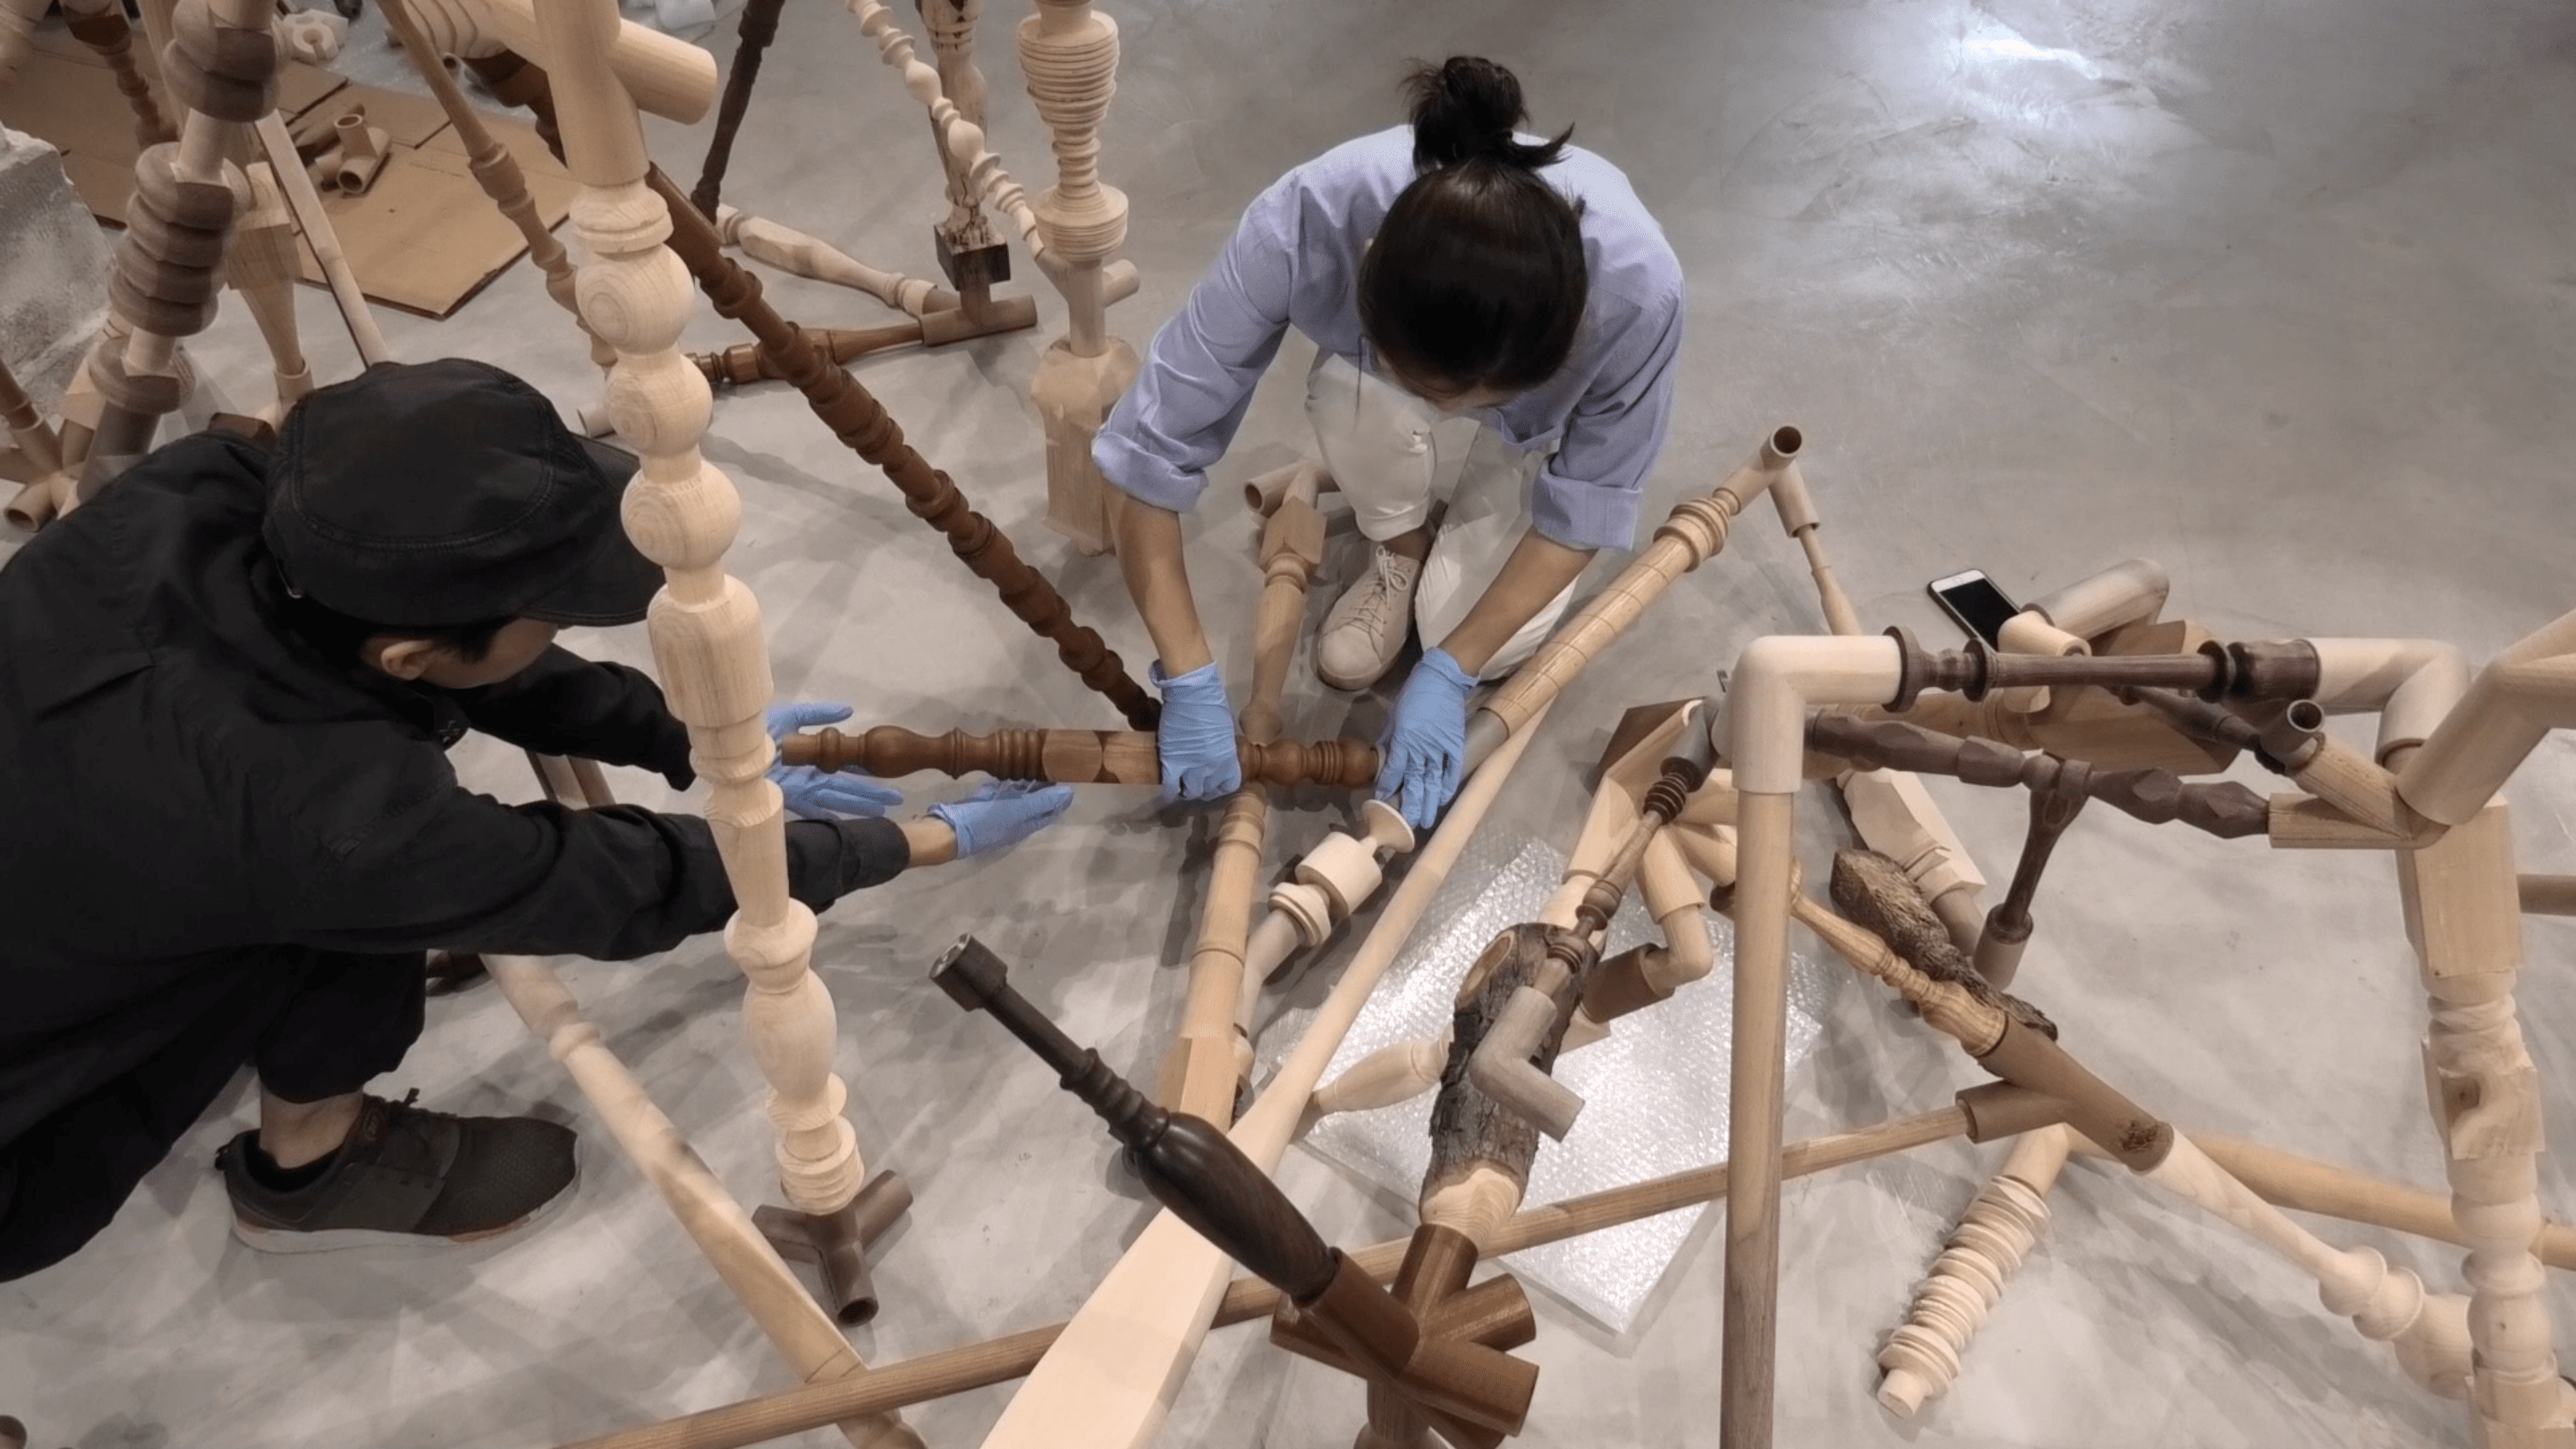 Gallery Interns Sai Wing (left) and Annie Lye (right) amending artwork 'Negotiated Differences' by Shirley Tse, HK Pavilion, Venice Biennale 2019.